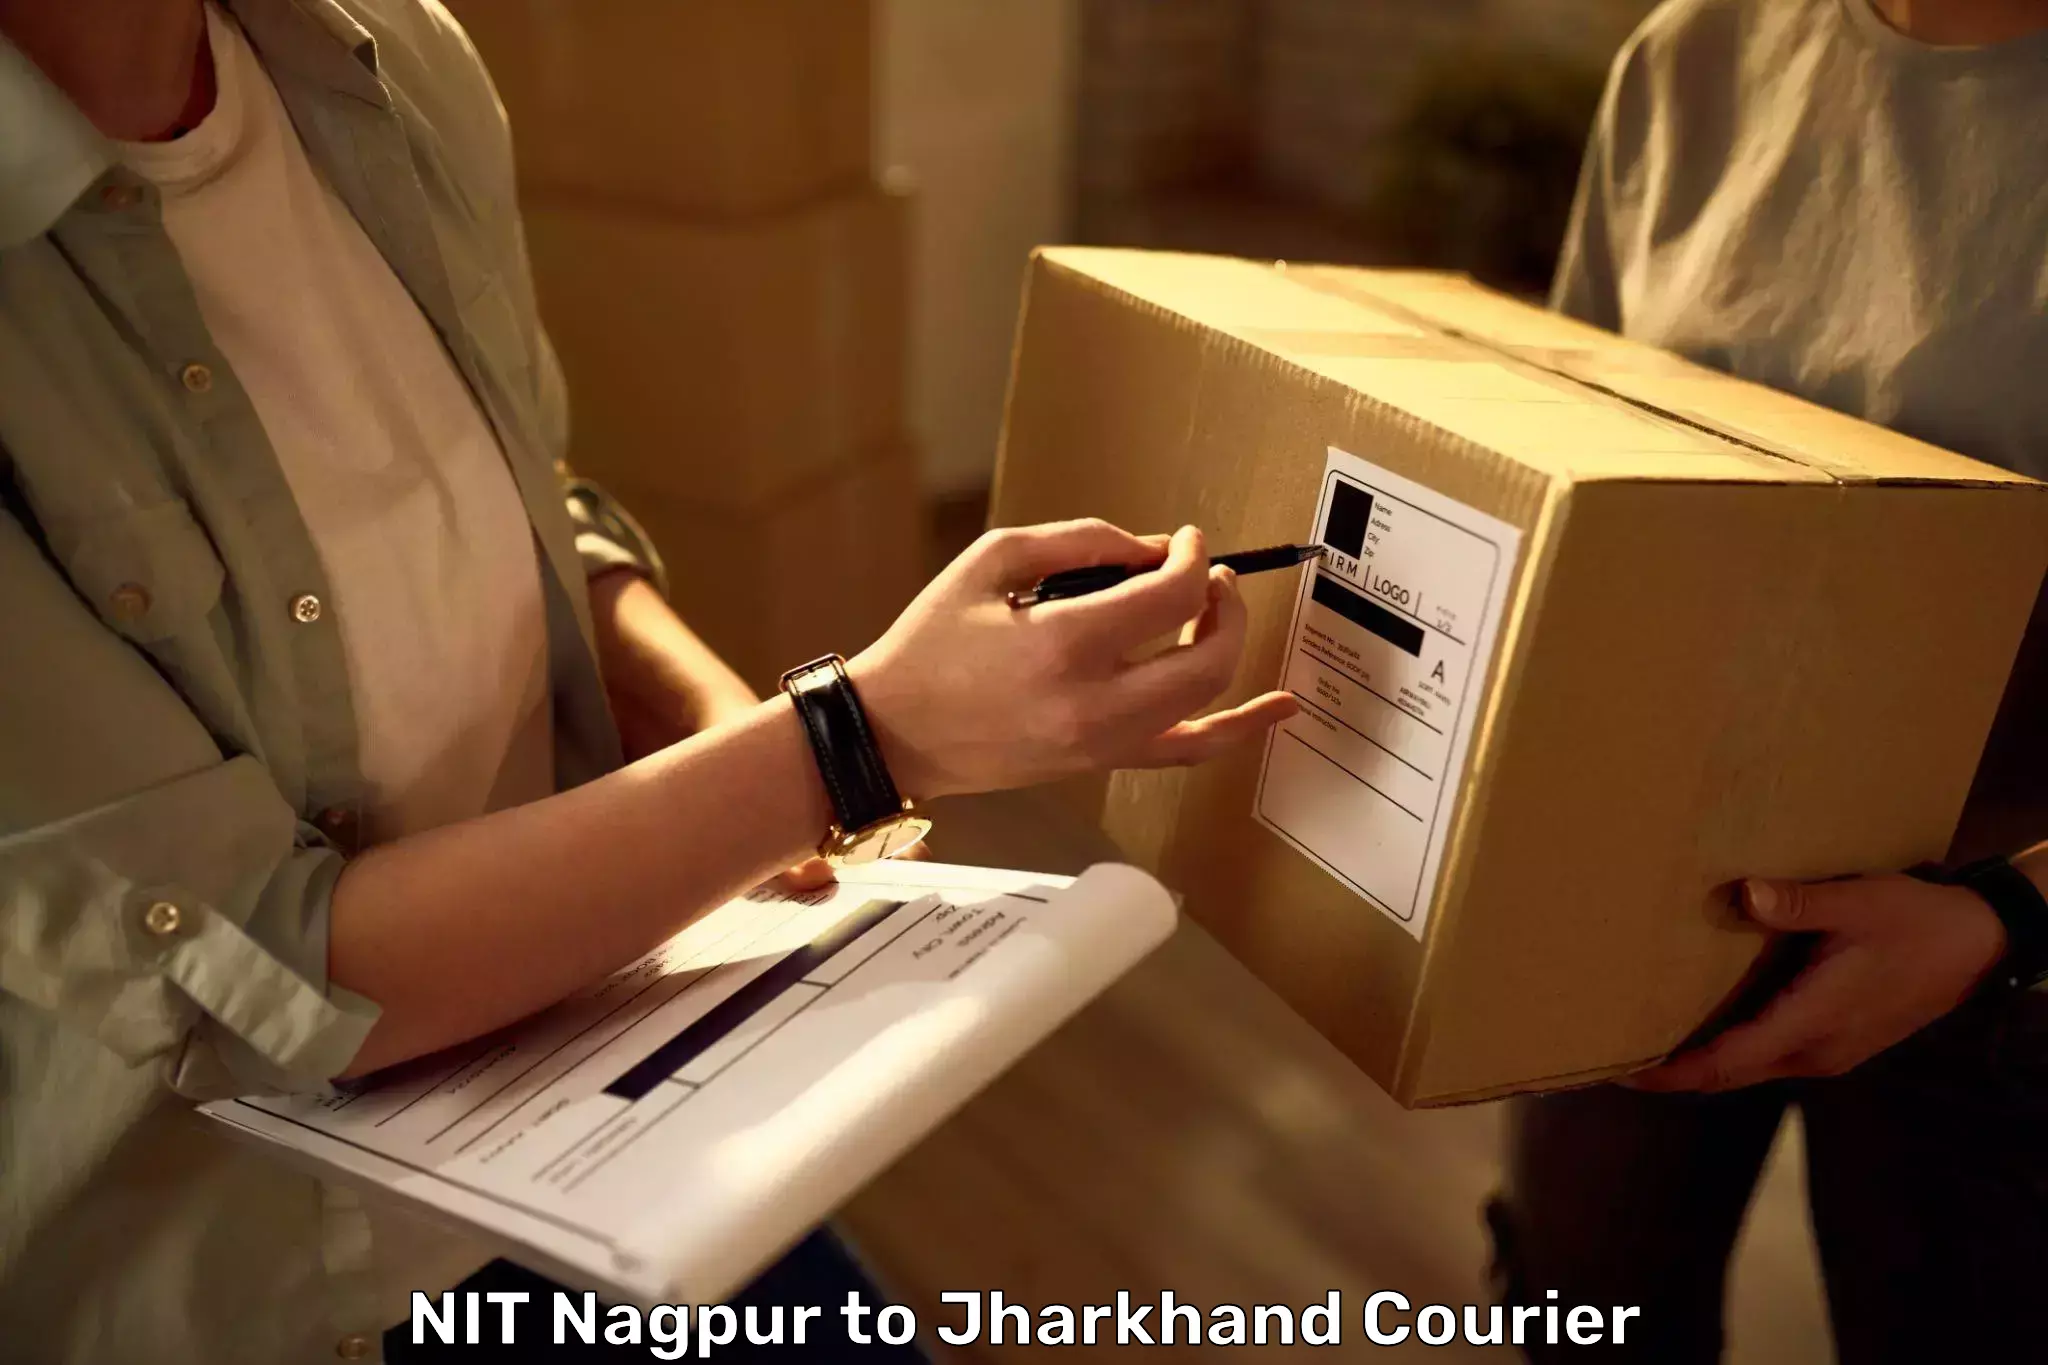 Luggage shipment specialists NIT Nagpur to Jharia